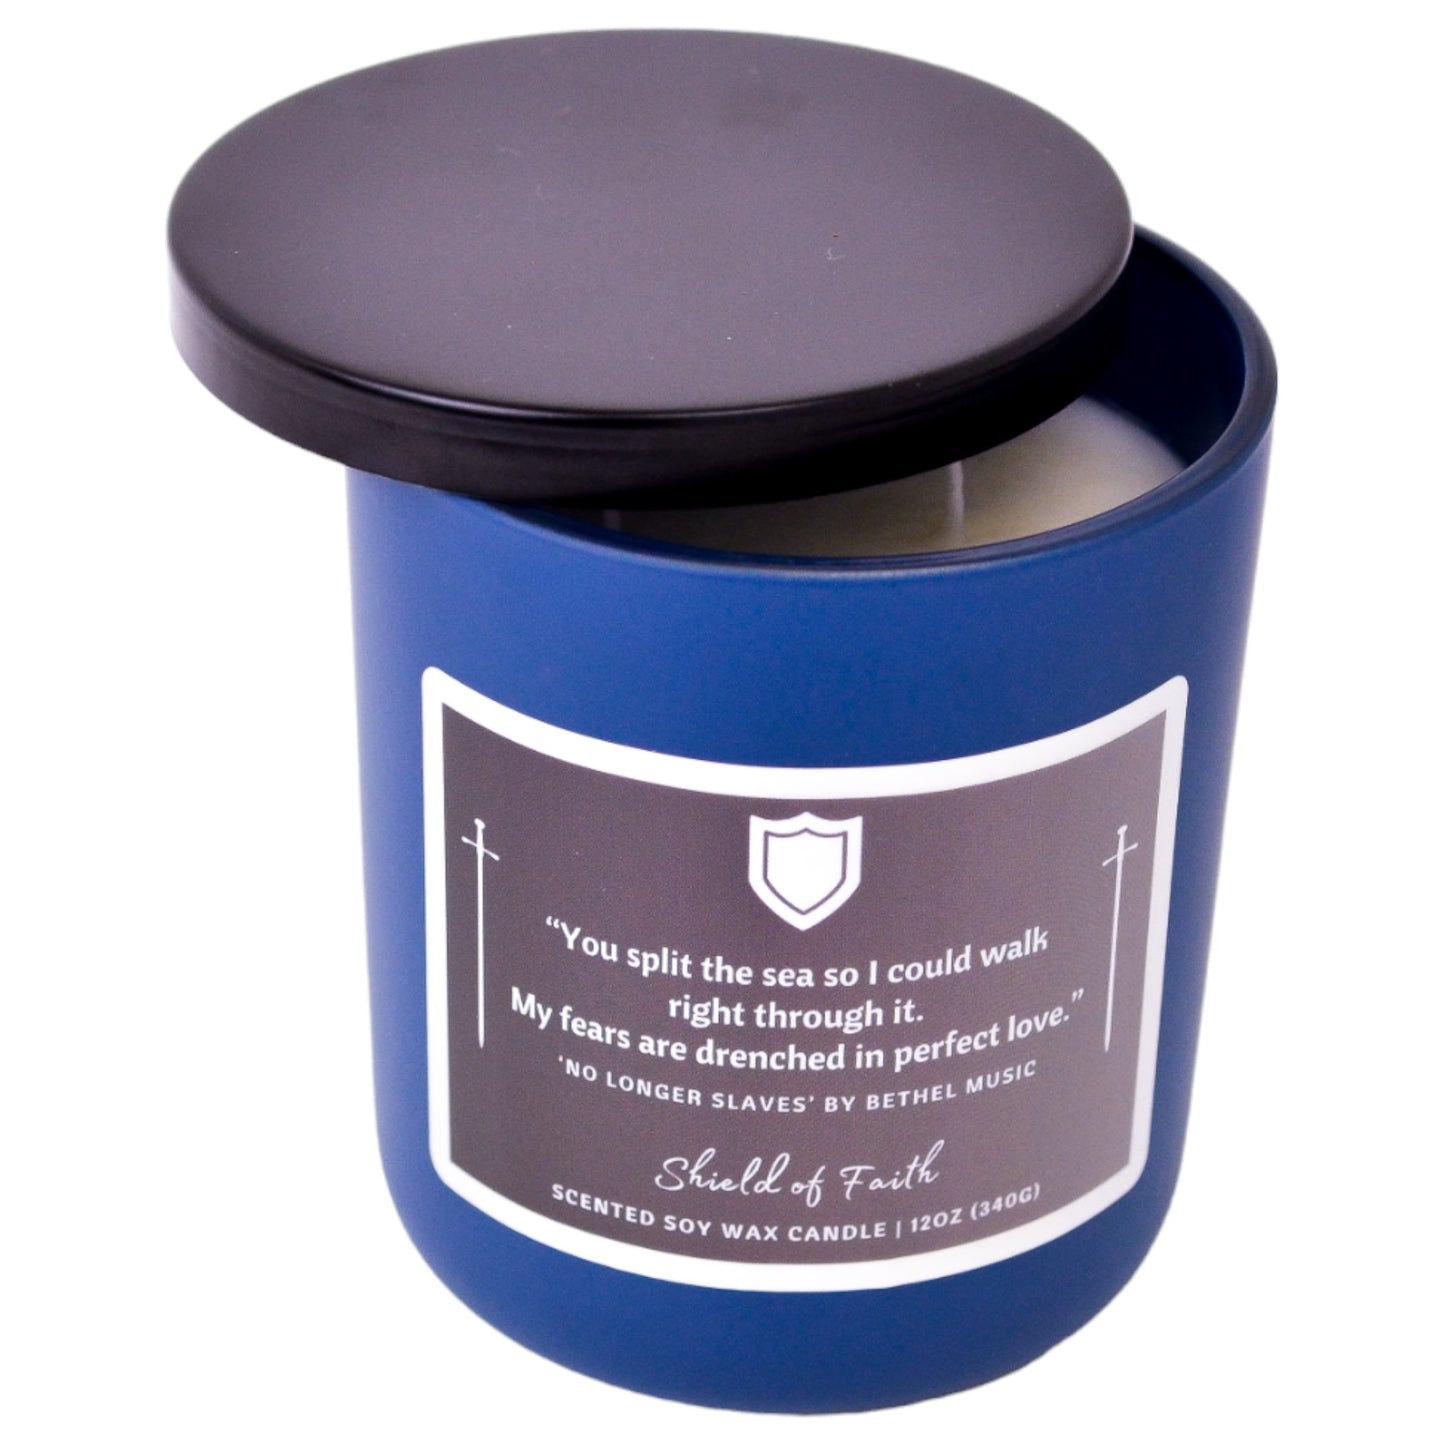 Shield of Faith Scented Soy Wax Christian Candle 12oz